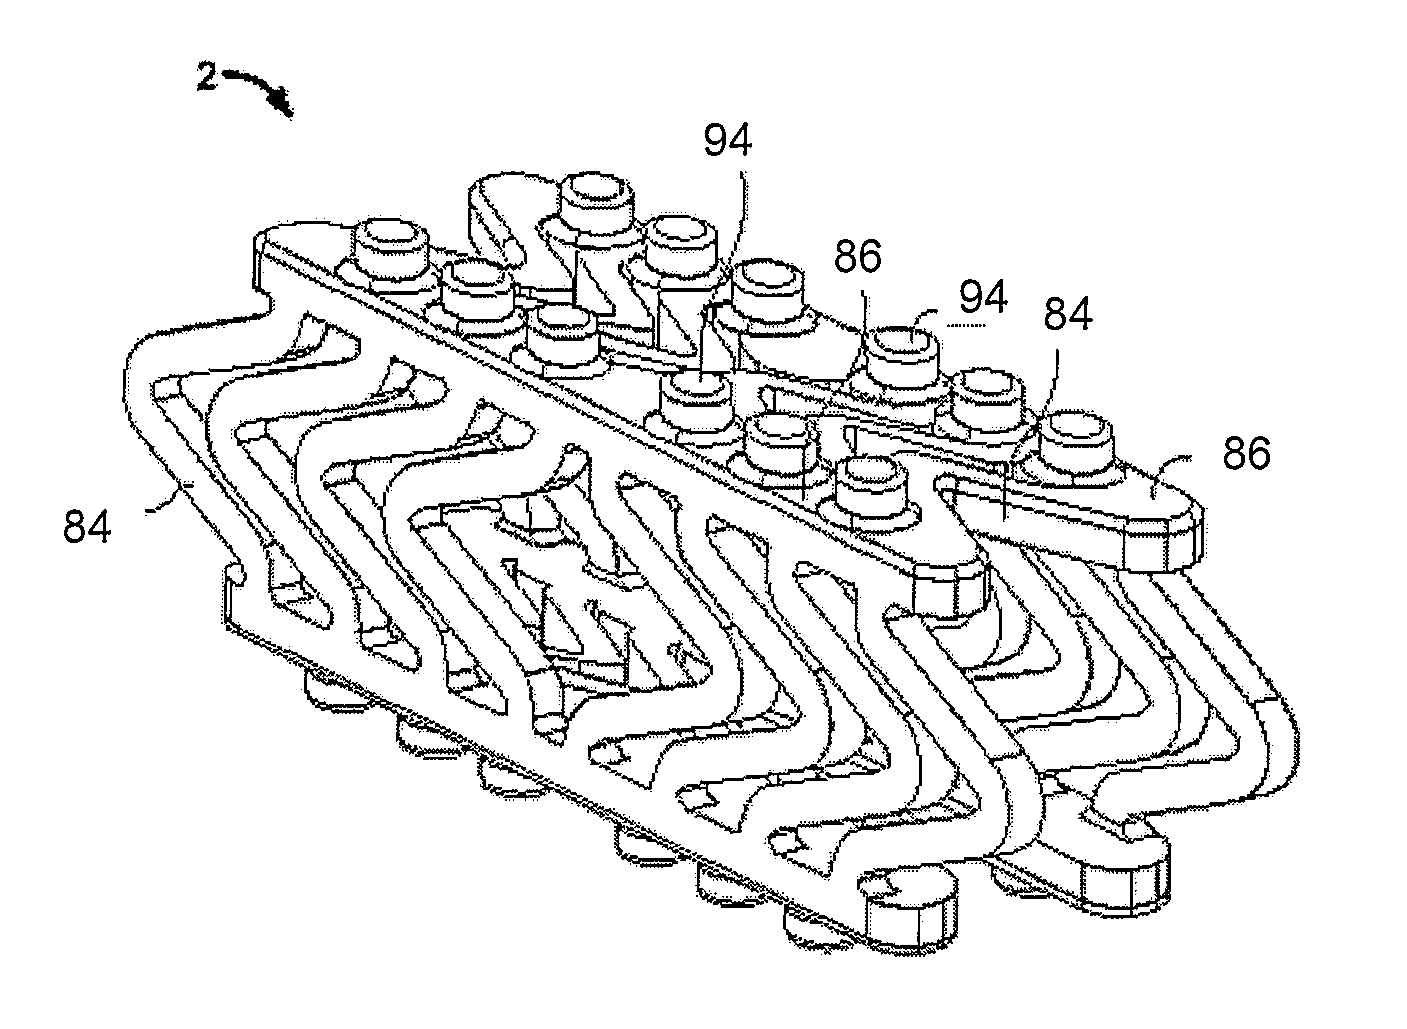 Expandable support device and method of use